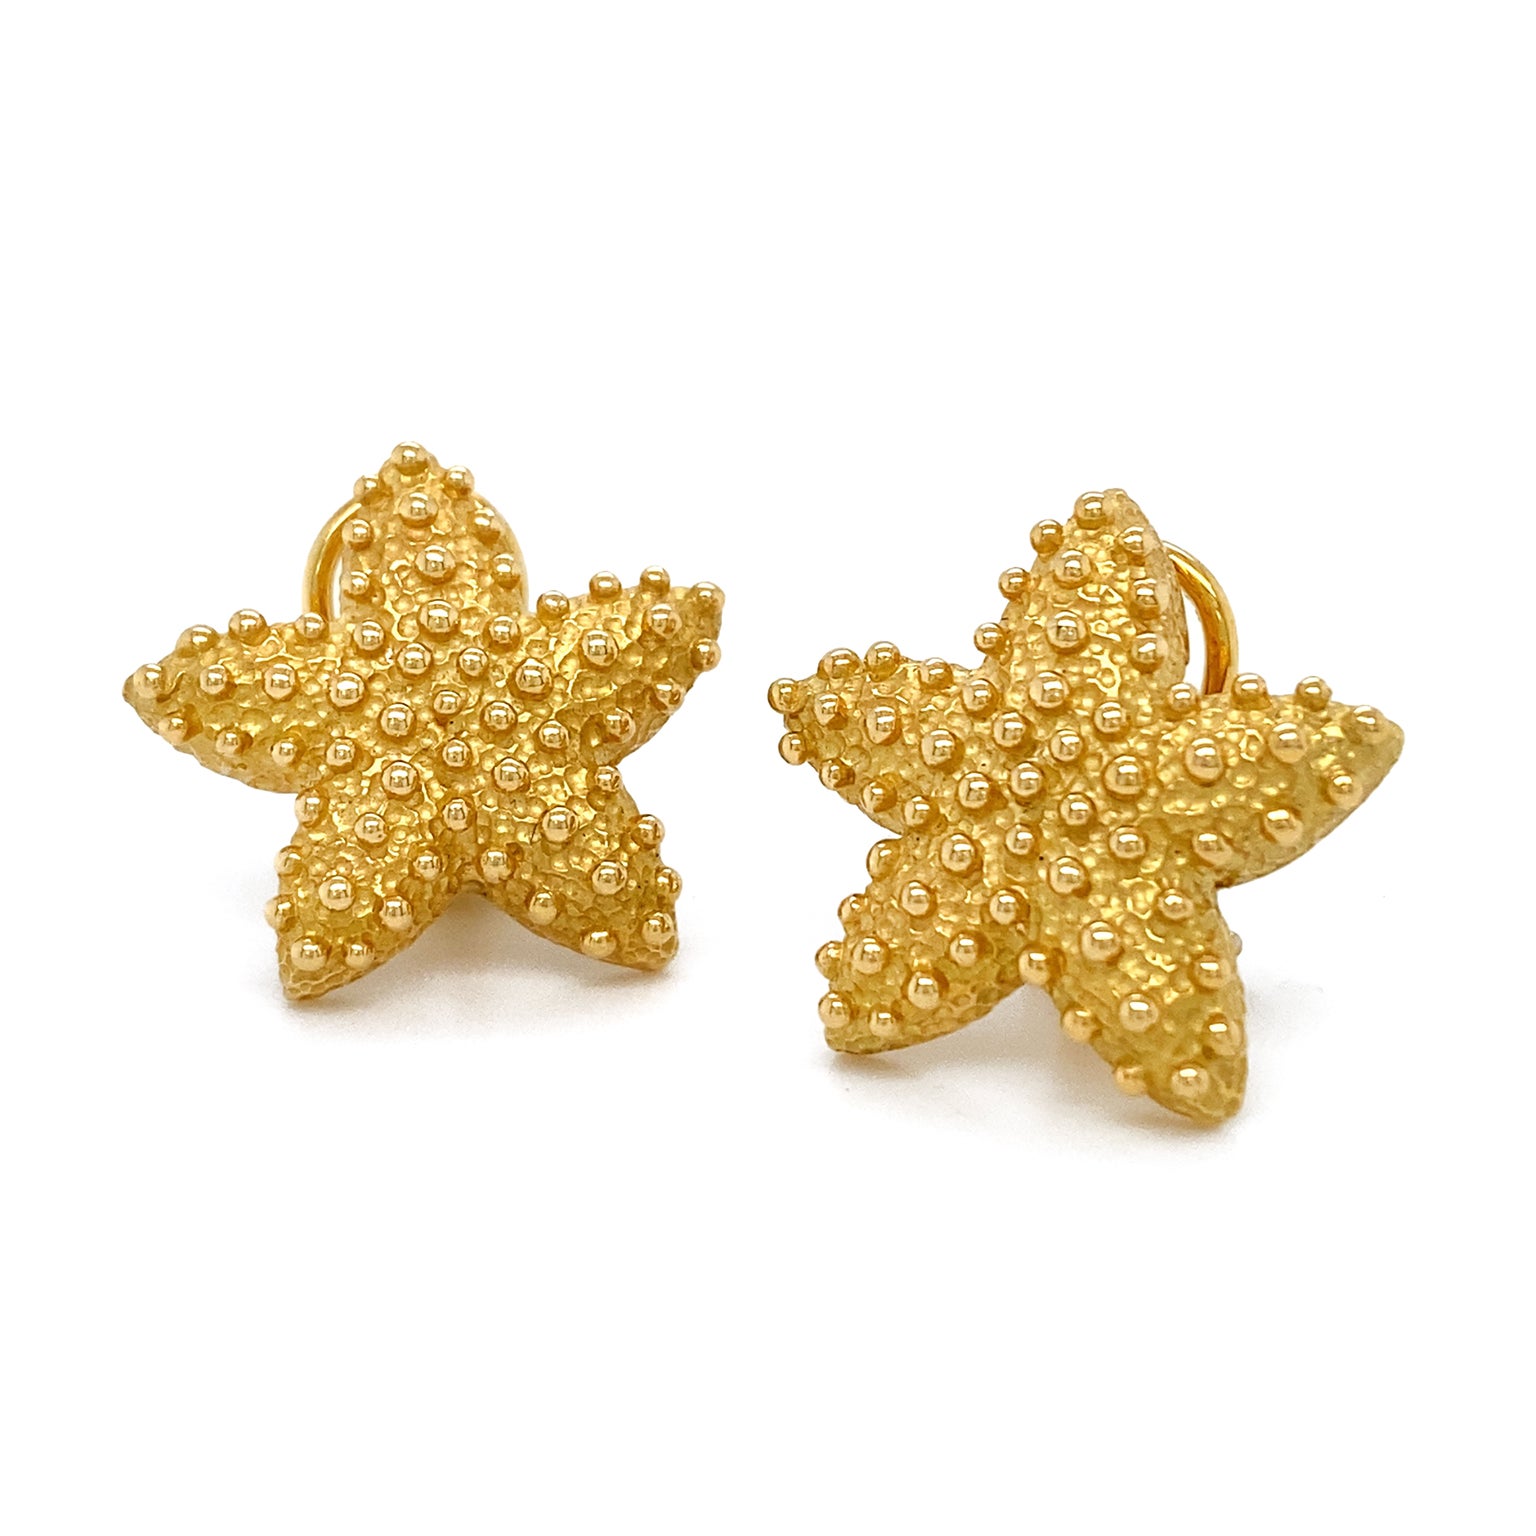 Gold enlivens these starfish earrings. The base is in the silhouette of the sea animal and has been given texture for both realism and precision. Smooth globes of the metal are dispersed over this to complete the oceanic spirit of the design.